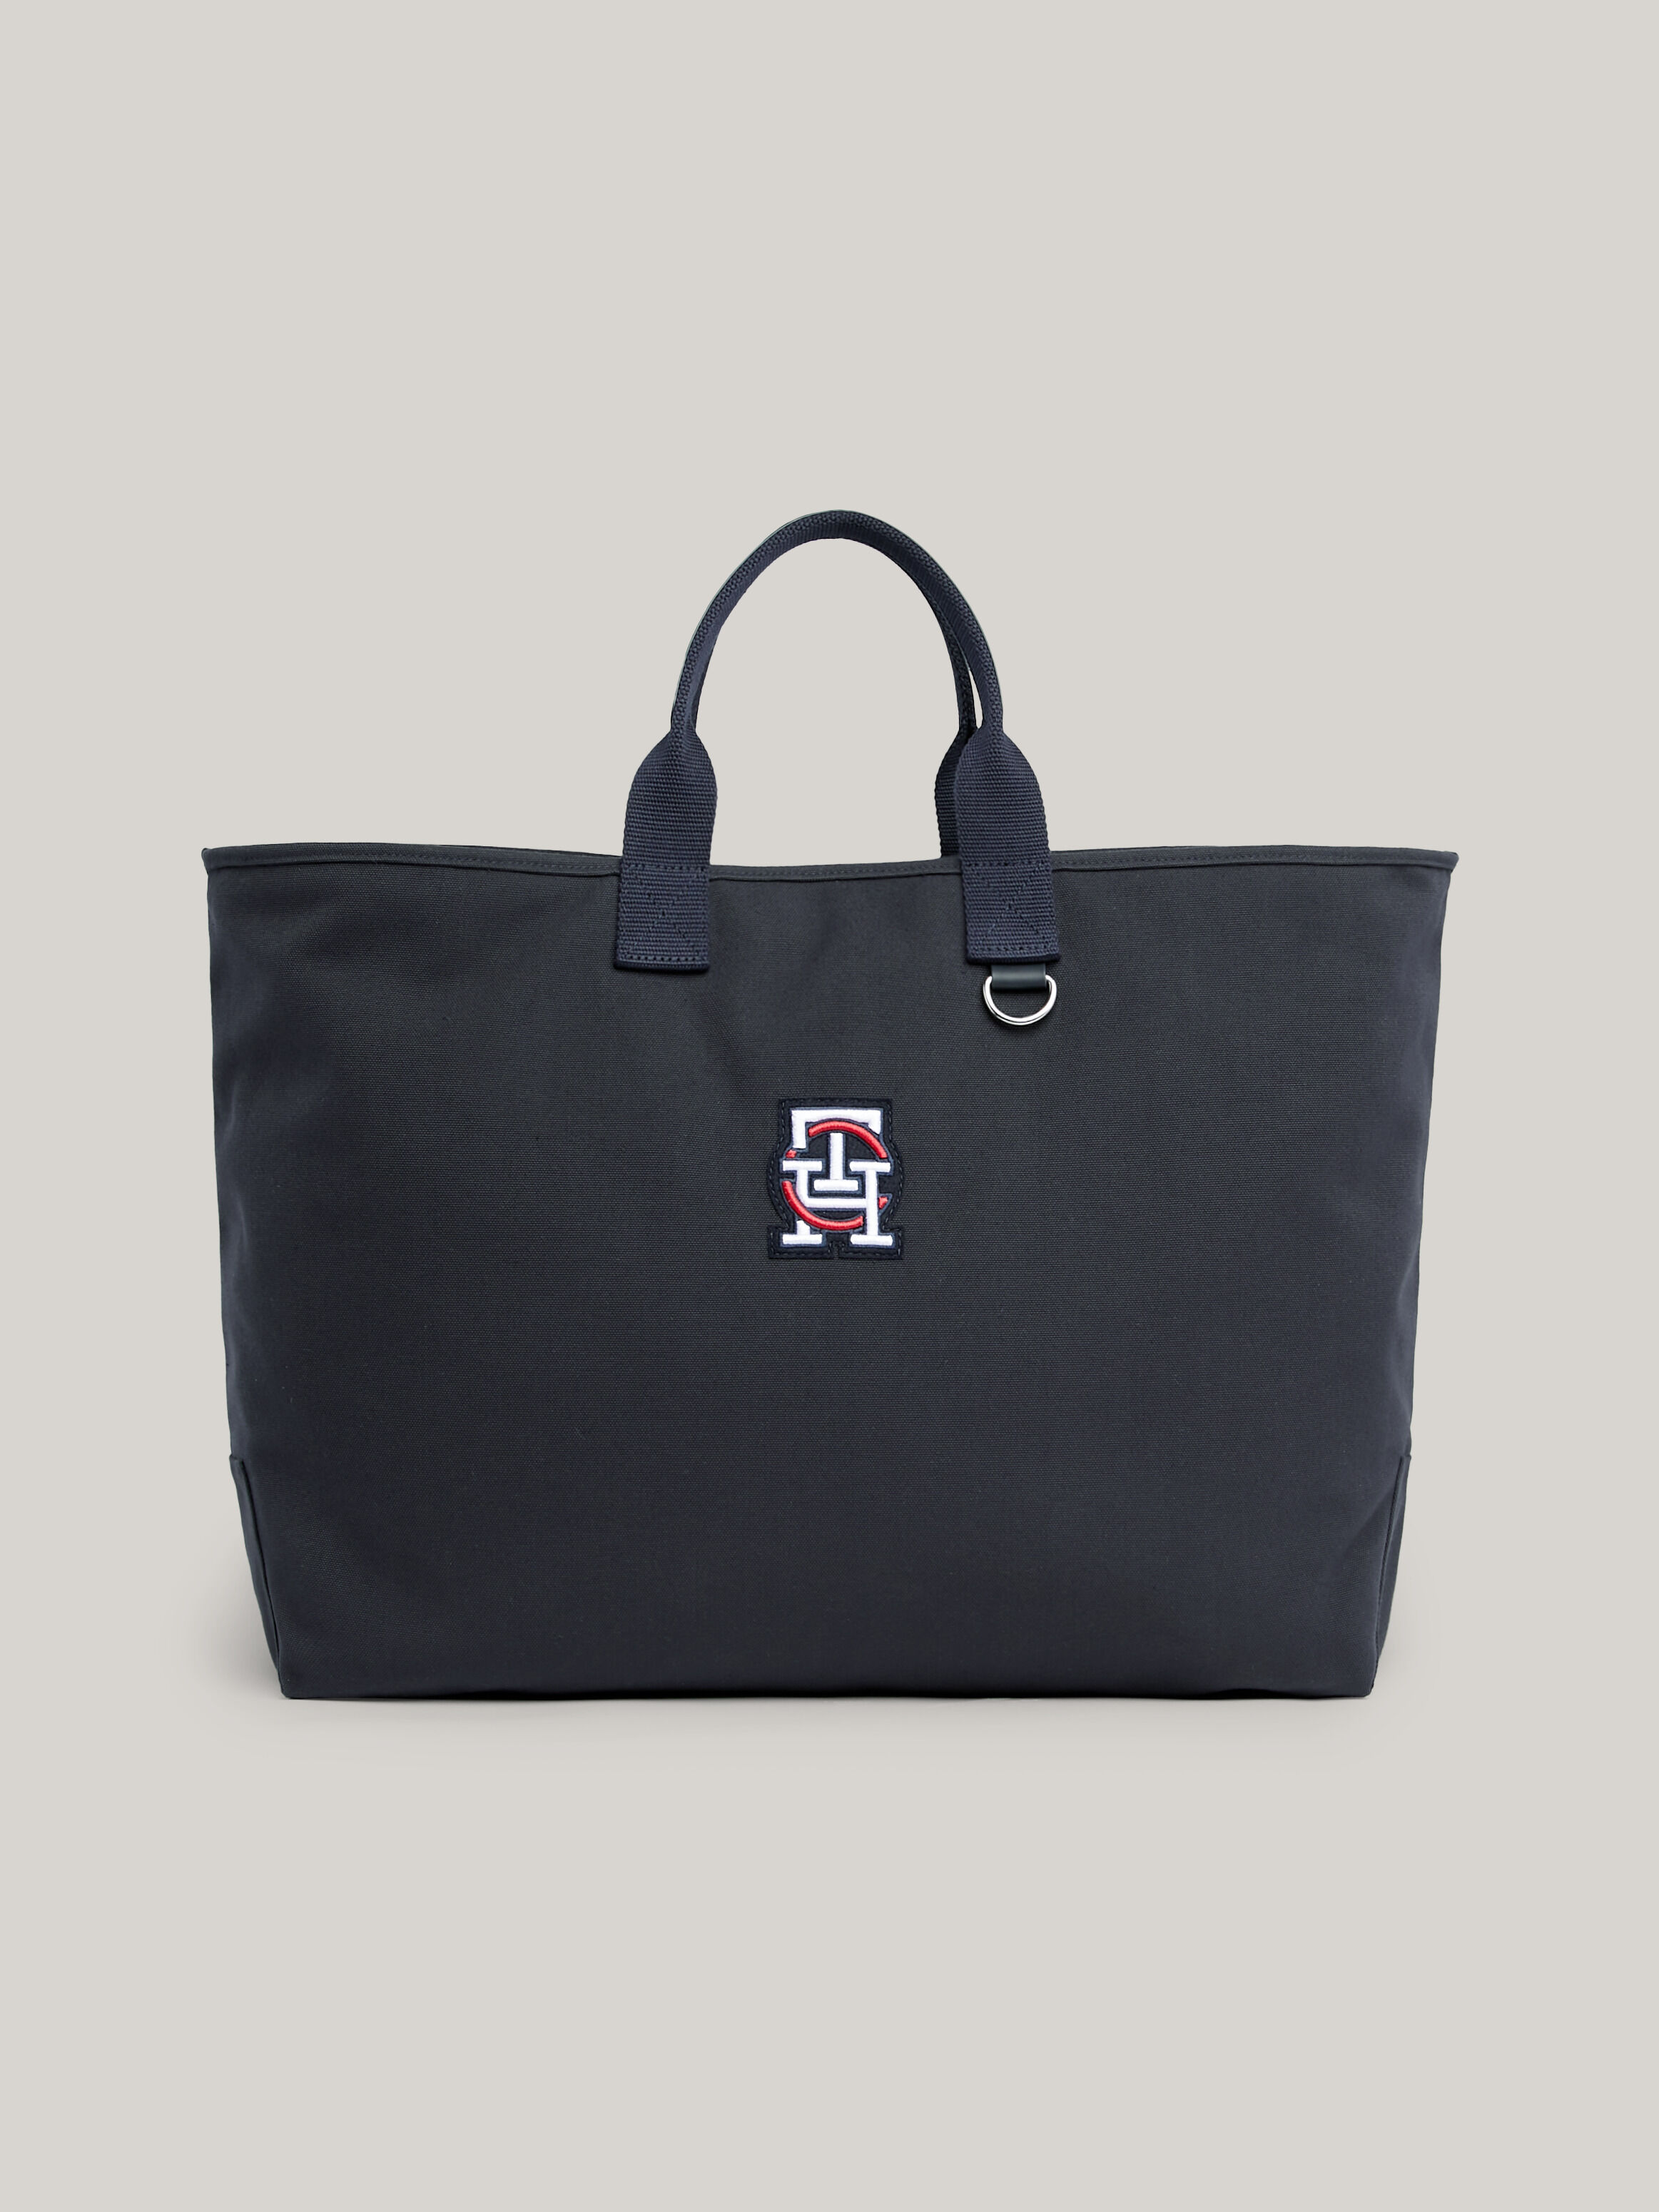 Tommy Hilfiger Bags & Accessories Clearance | Nordstrom Rack